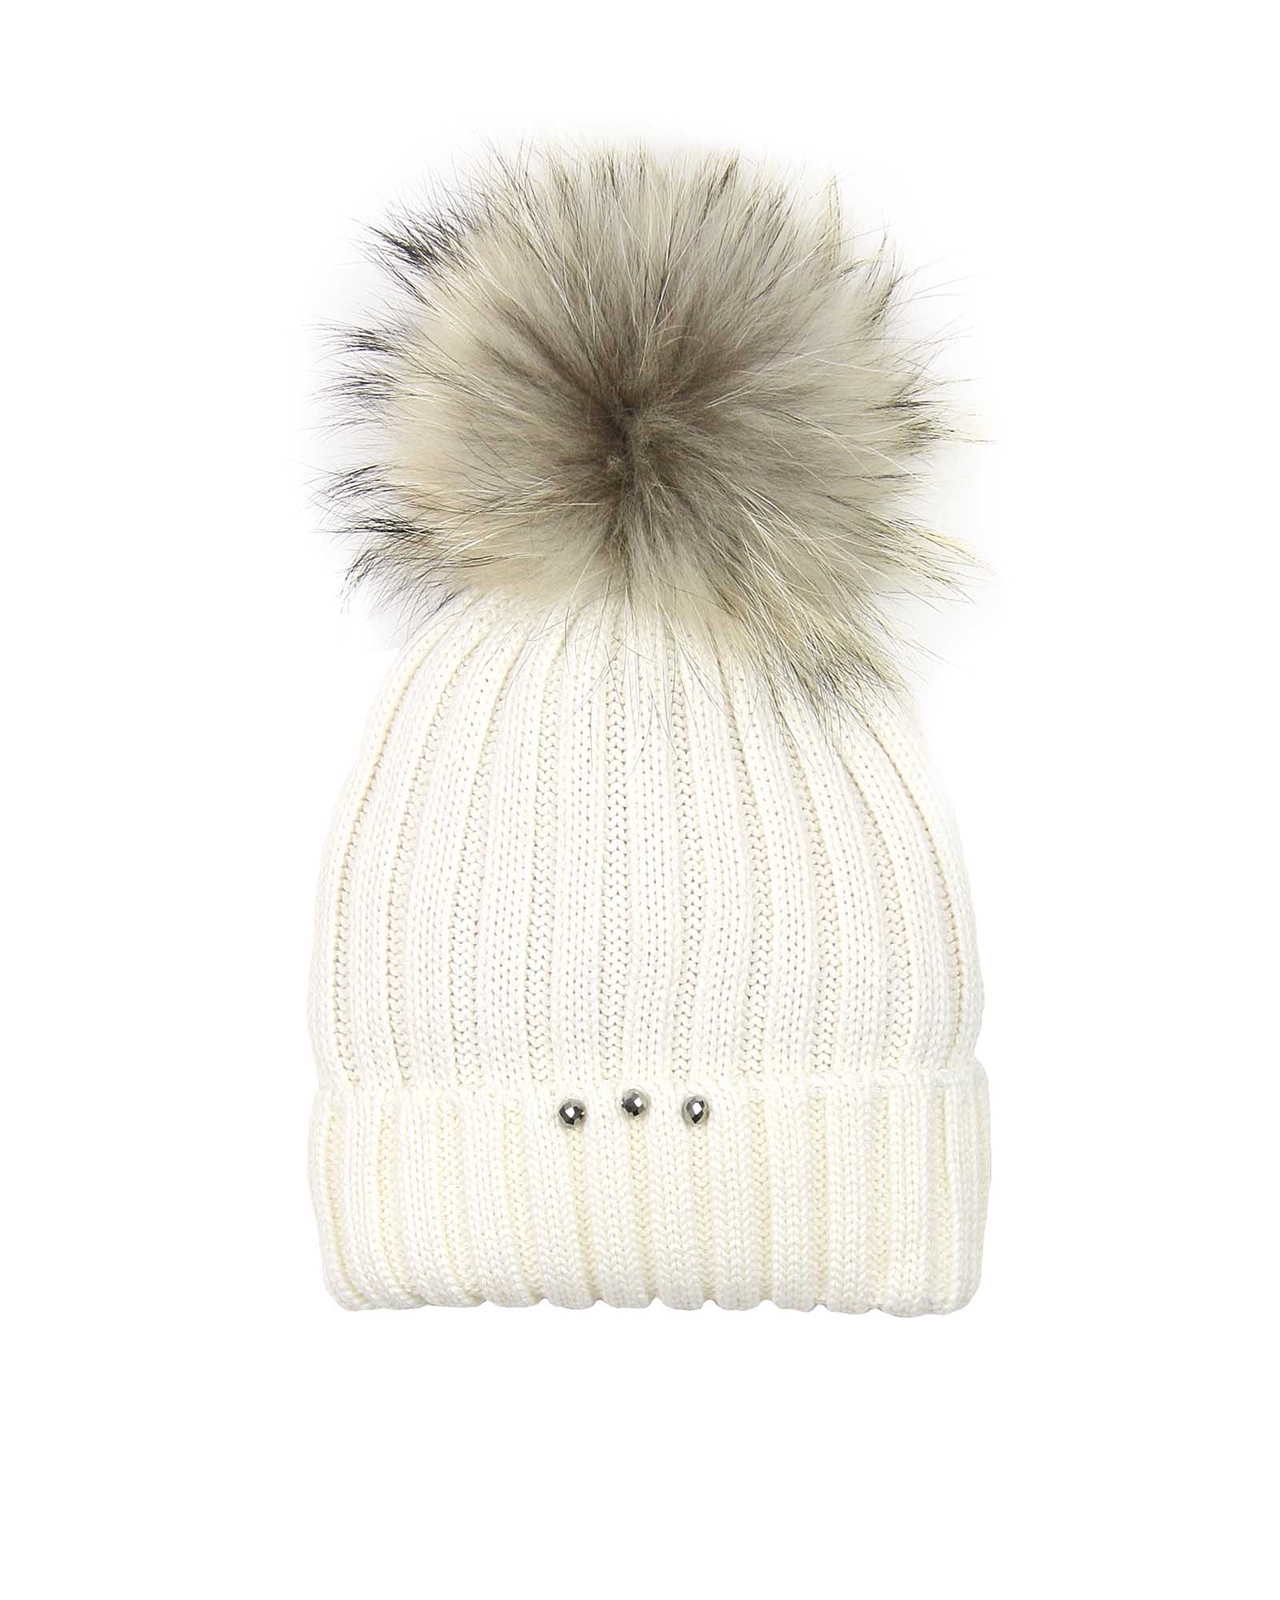 Barbaras Girls Wool Beanie Hat in Ivory with Racoon Pompom - Barbara ...